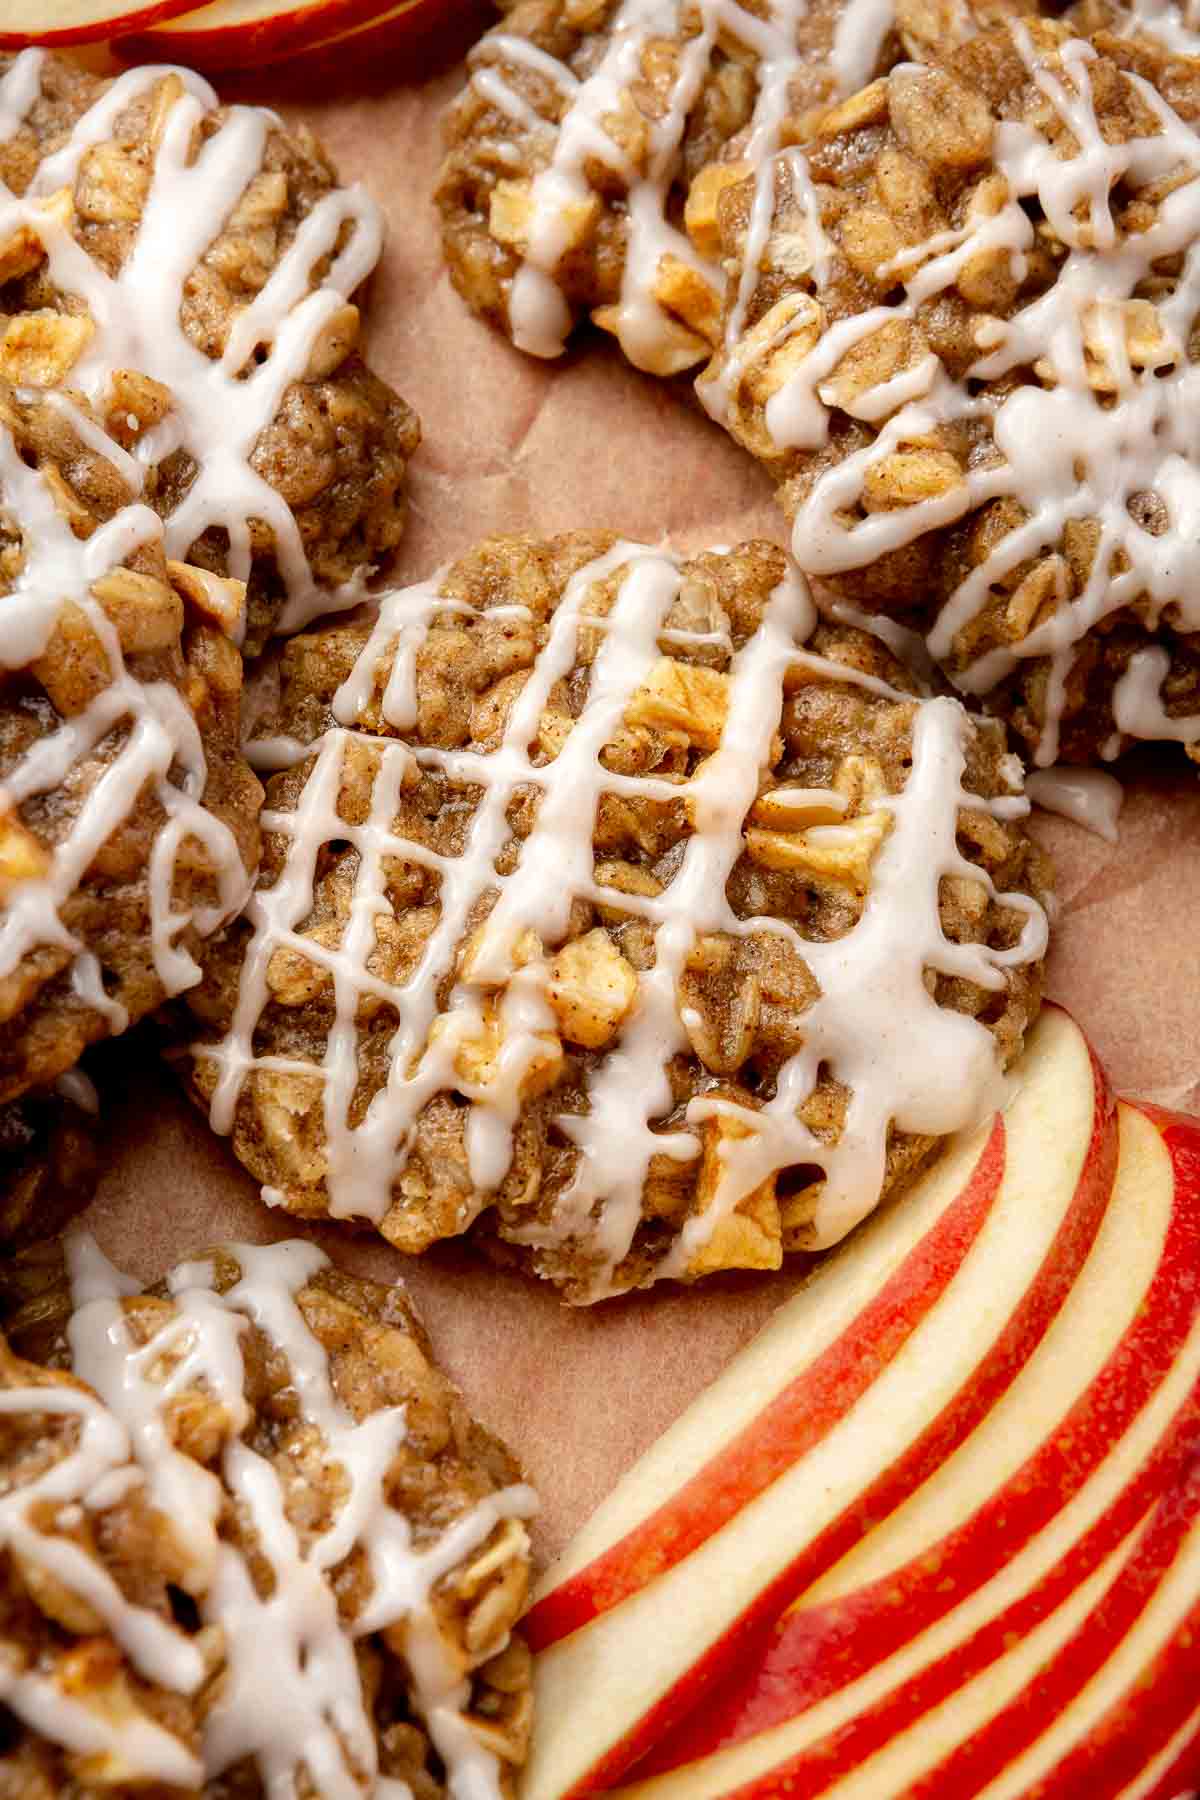 Cookies with diced apples and drizzled with glaze.